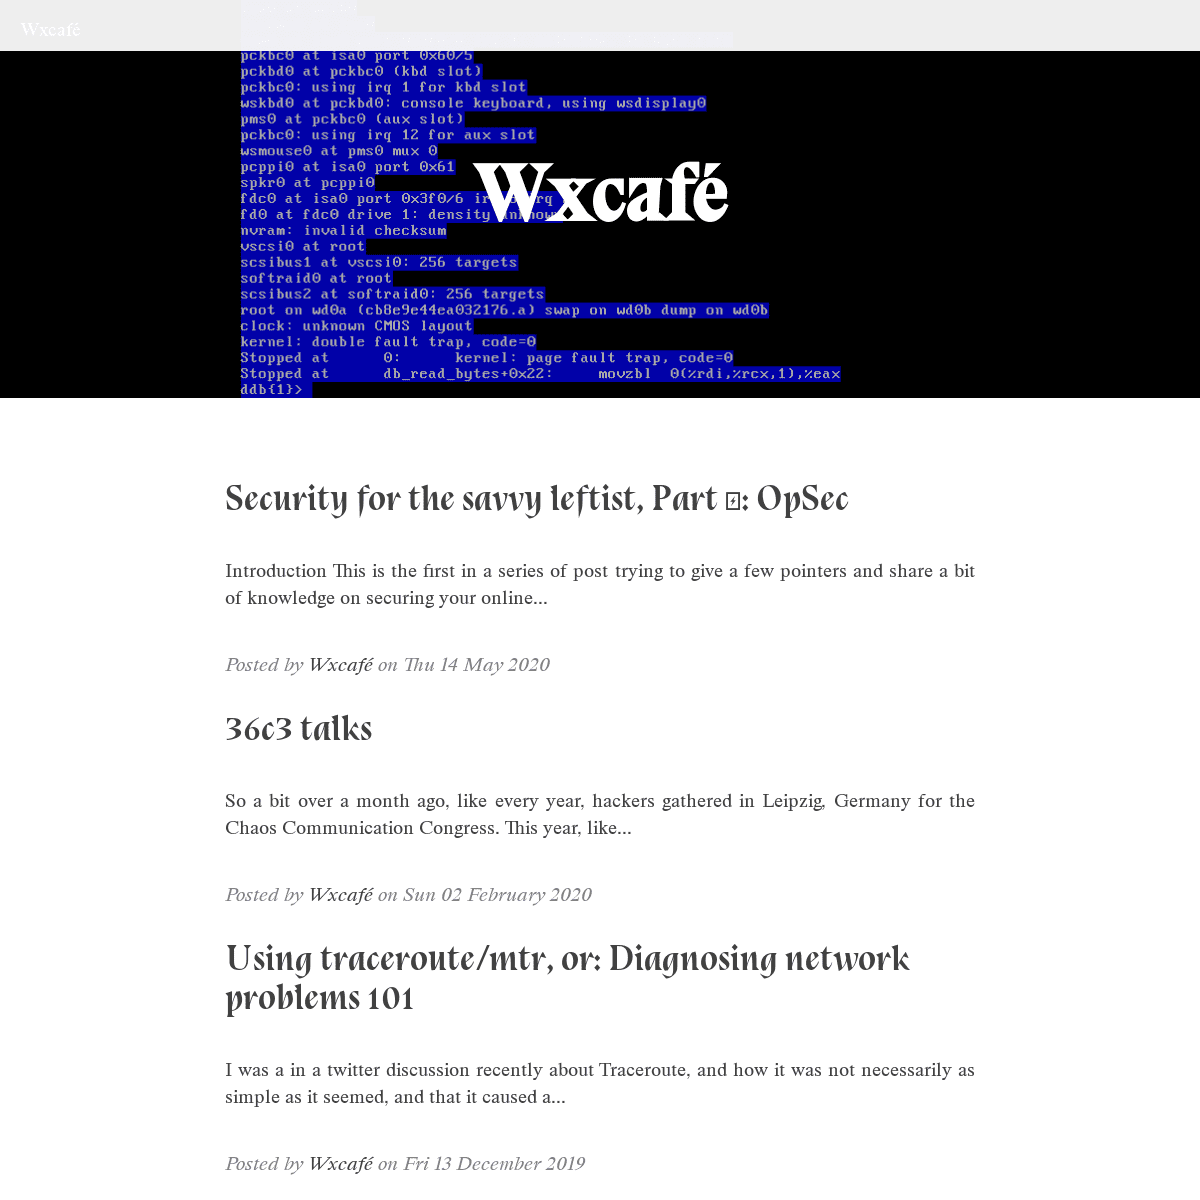 A complete backup of https://wxcafe.net